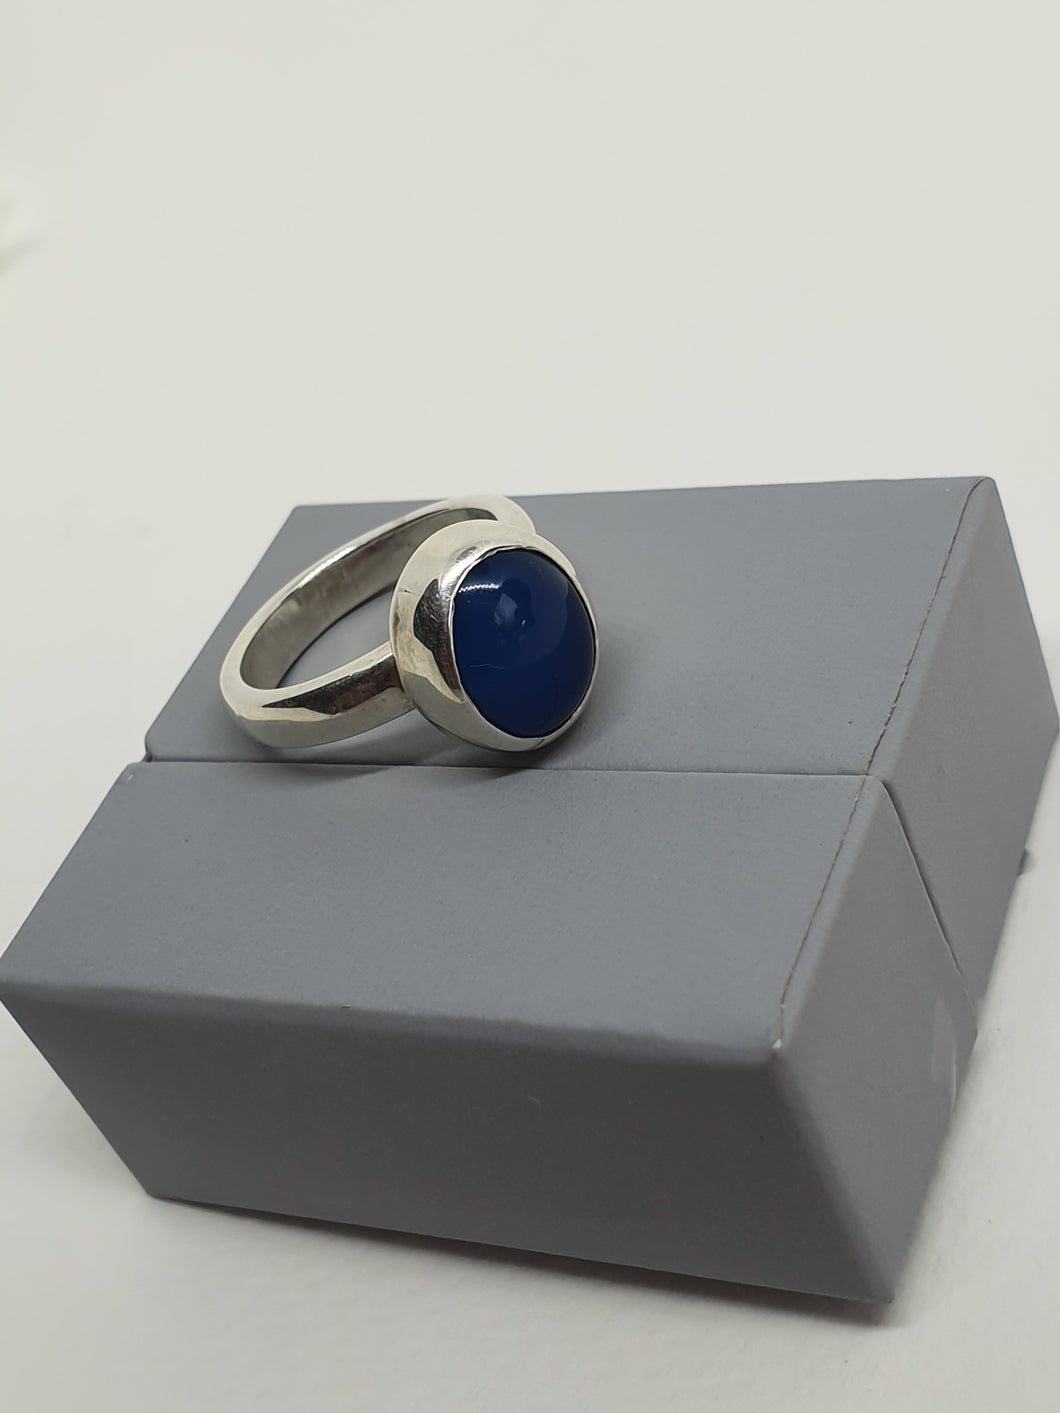 SOLD! 925 serling silver ring with a blue agate gemstone